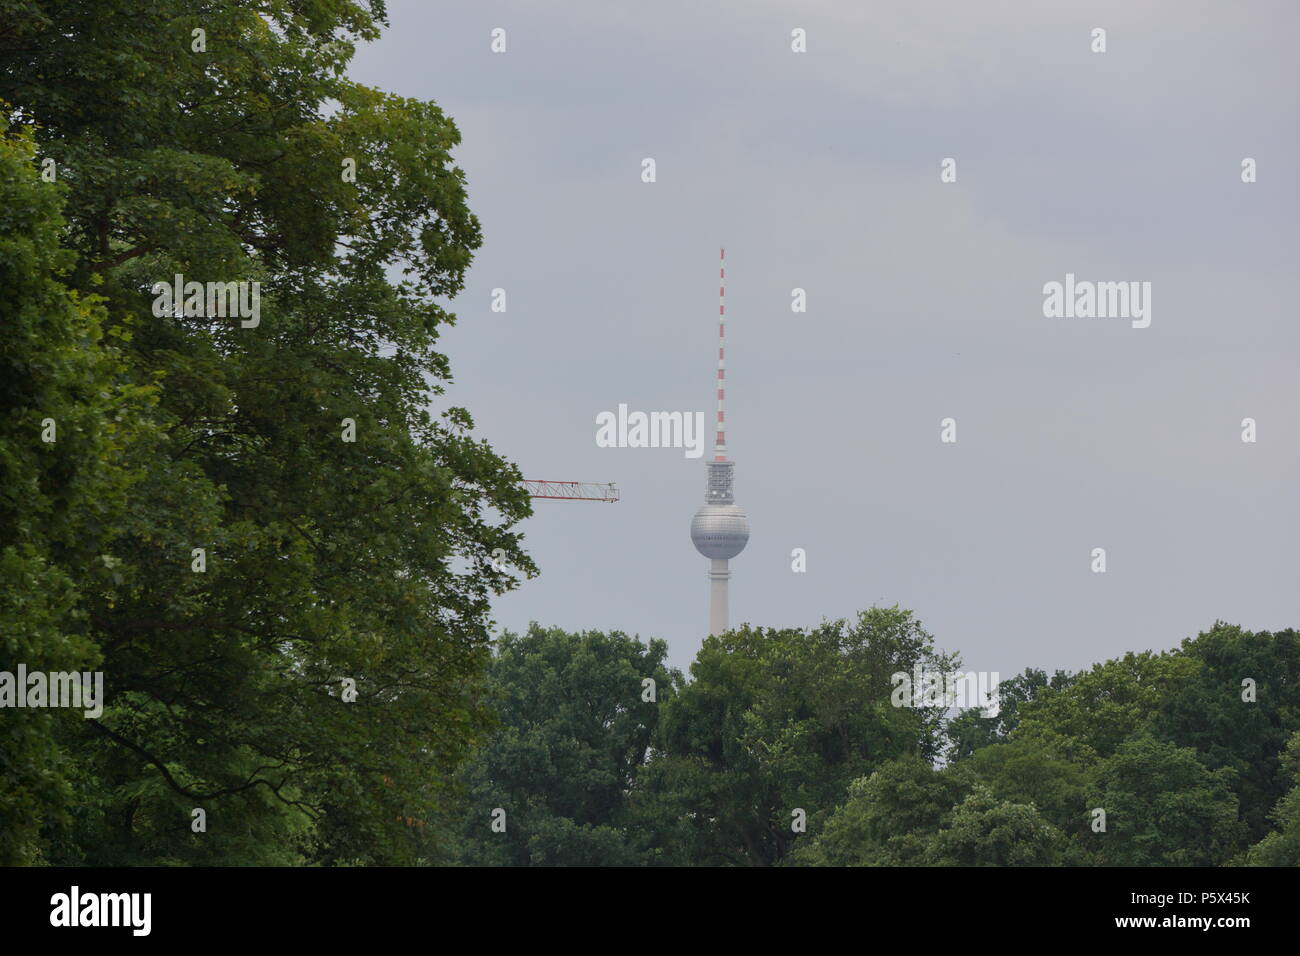 Television tower at the Alexanderplatz  with crane arm from the left side, seen from Hasenheide park Neukoelln, Berlin Stock Photo